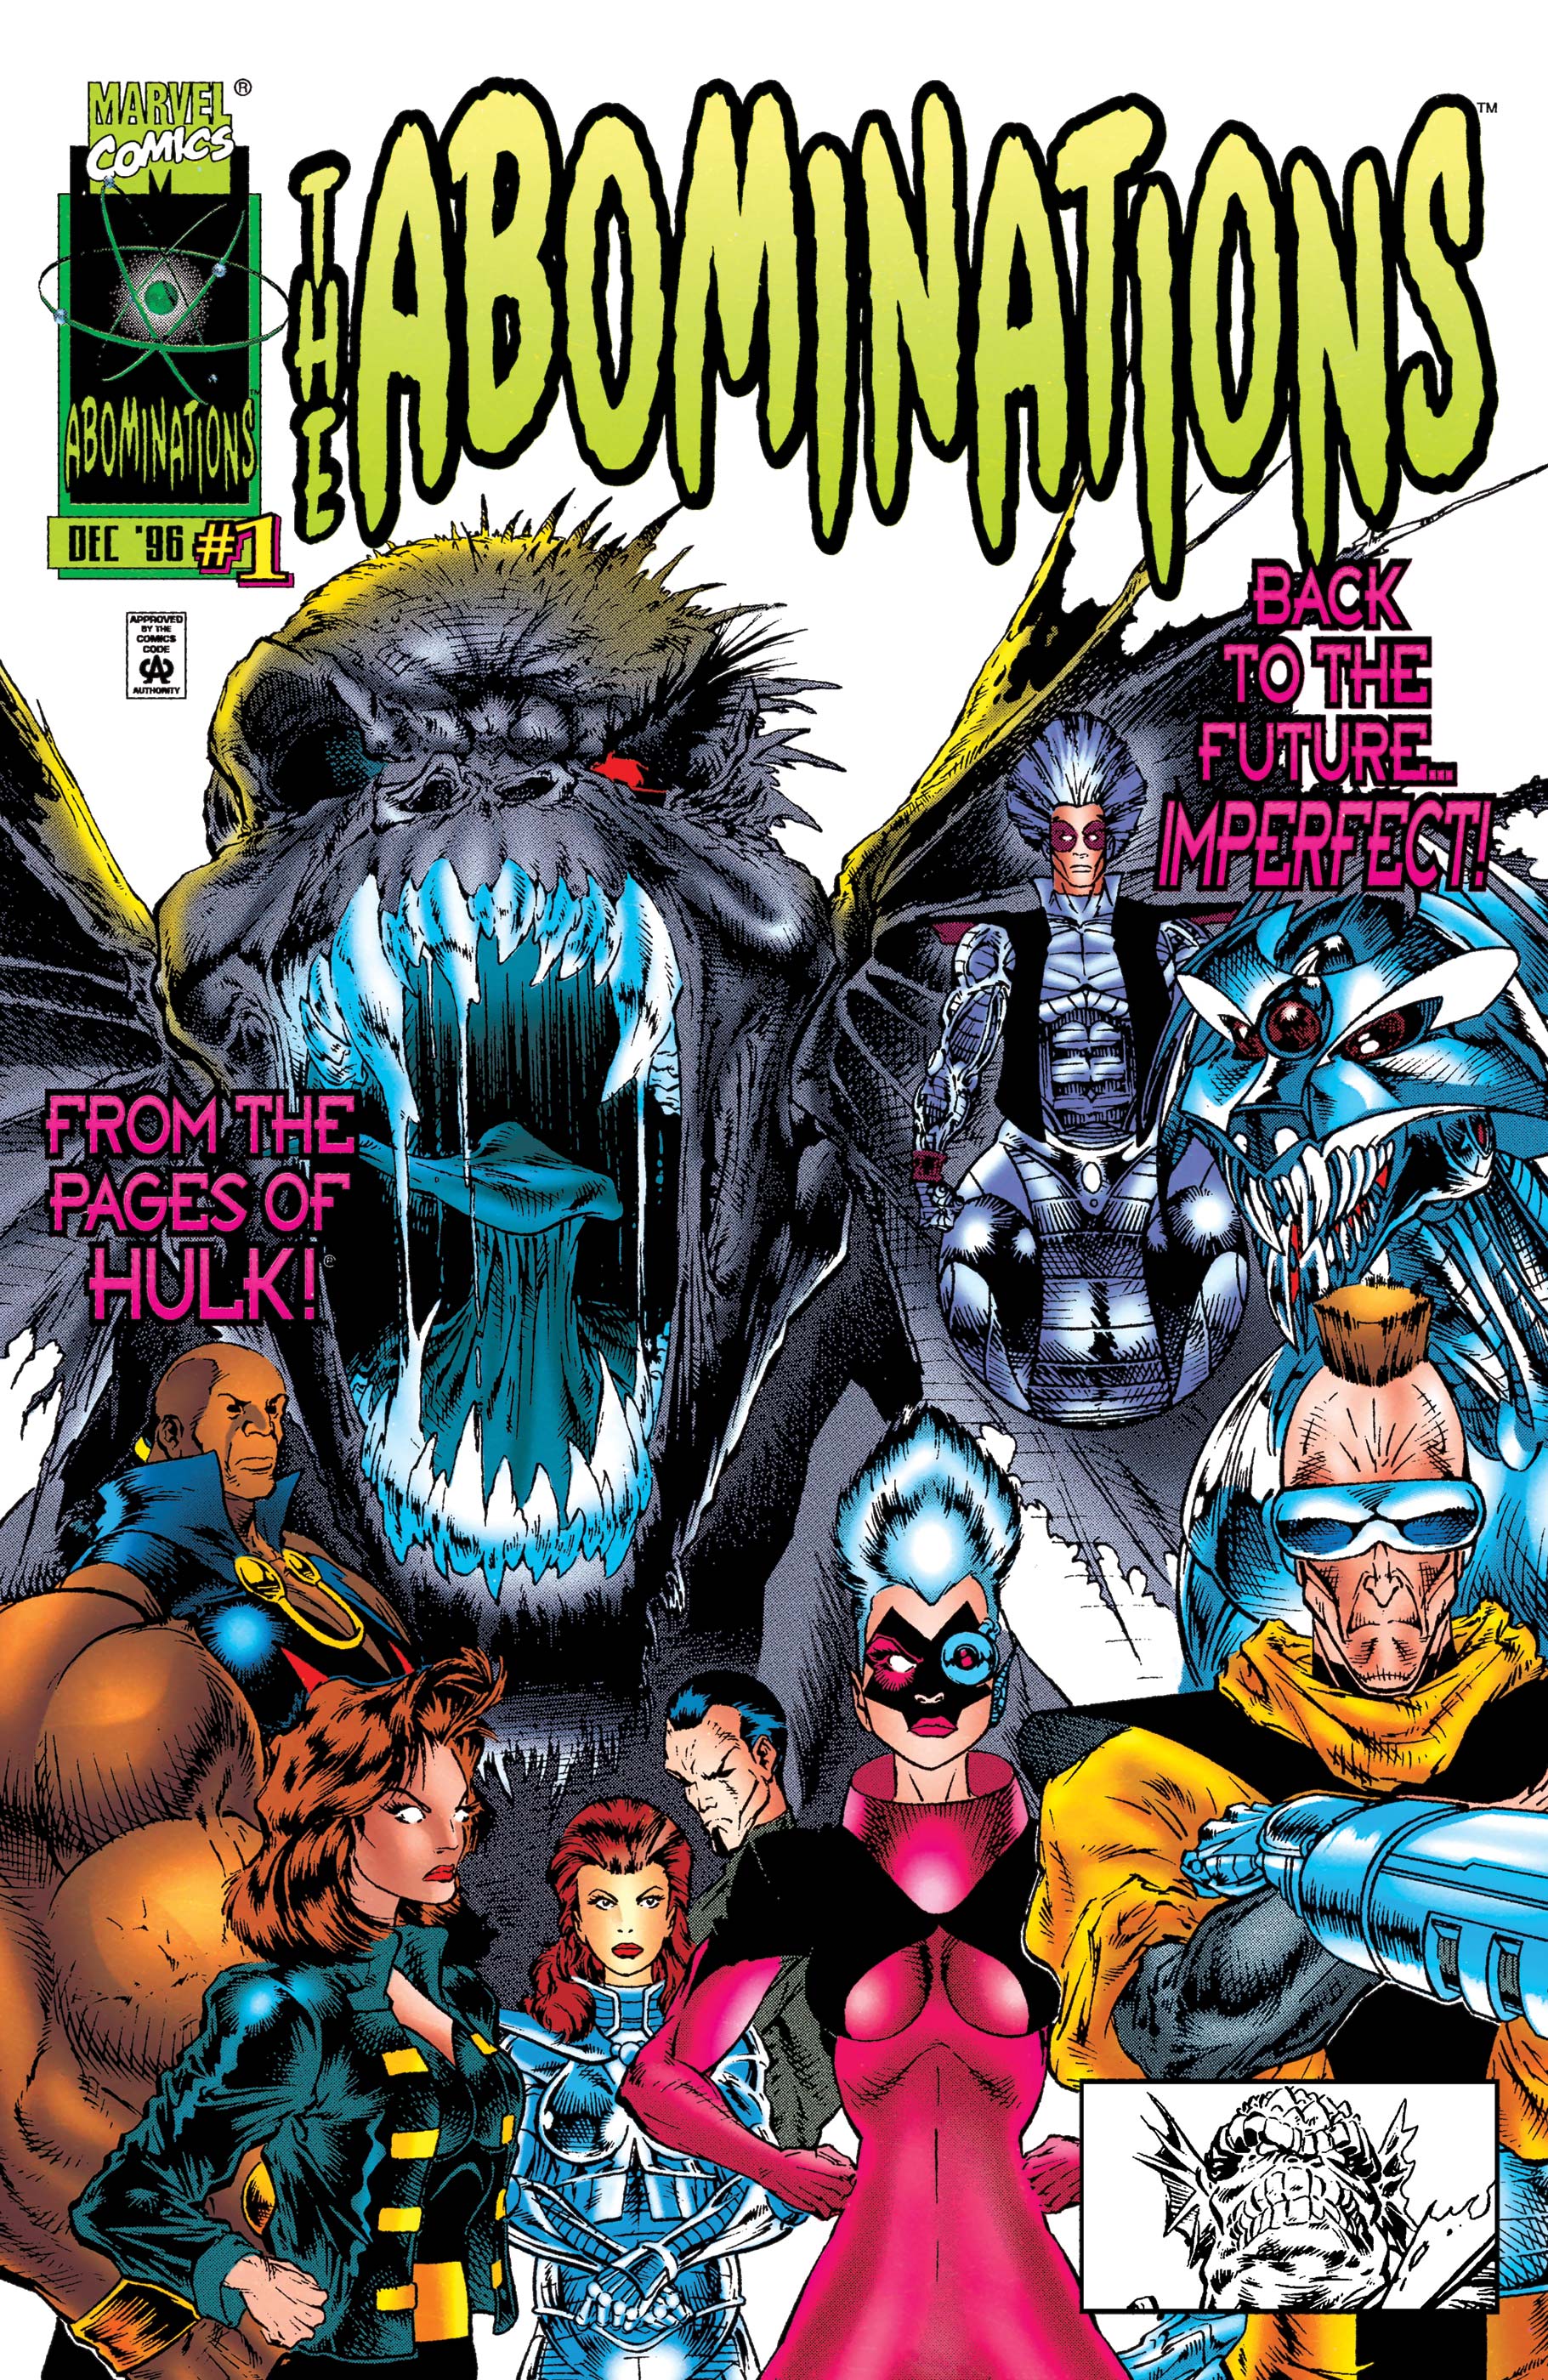 Abominations (1996) #1